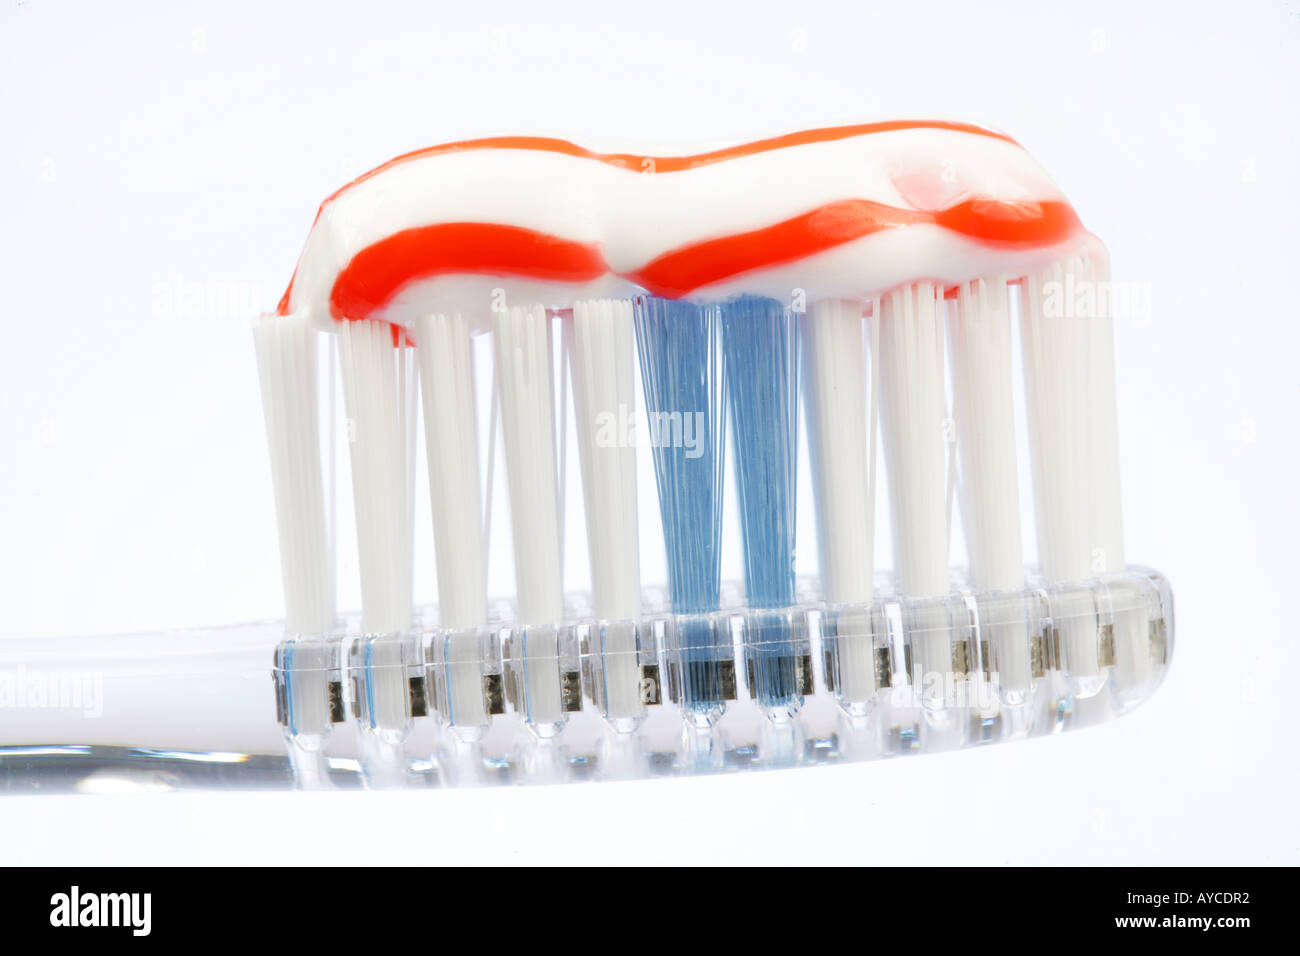 DEU Germany Toothbrush with toothpaste Stock Photo